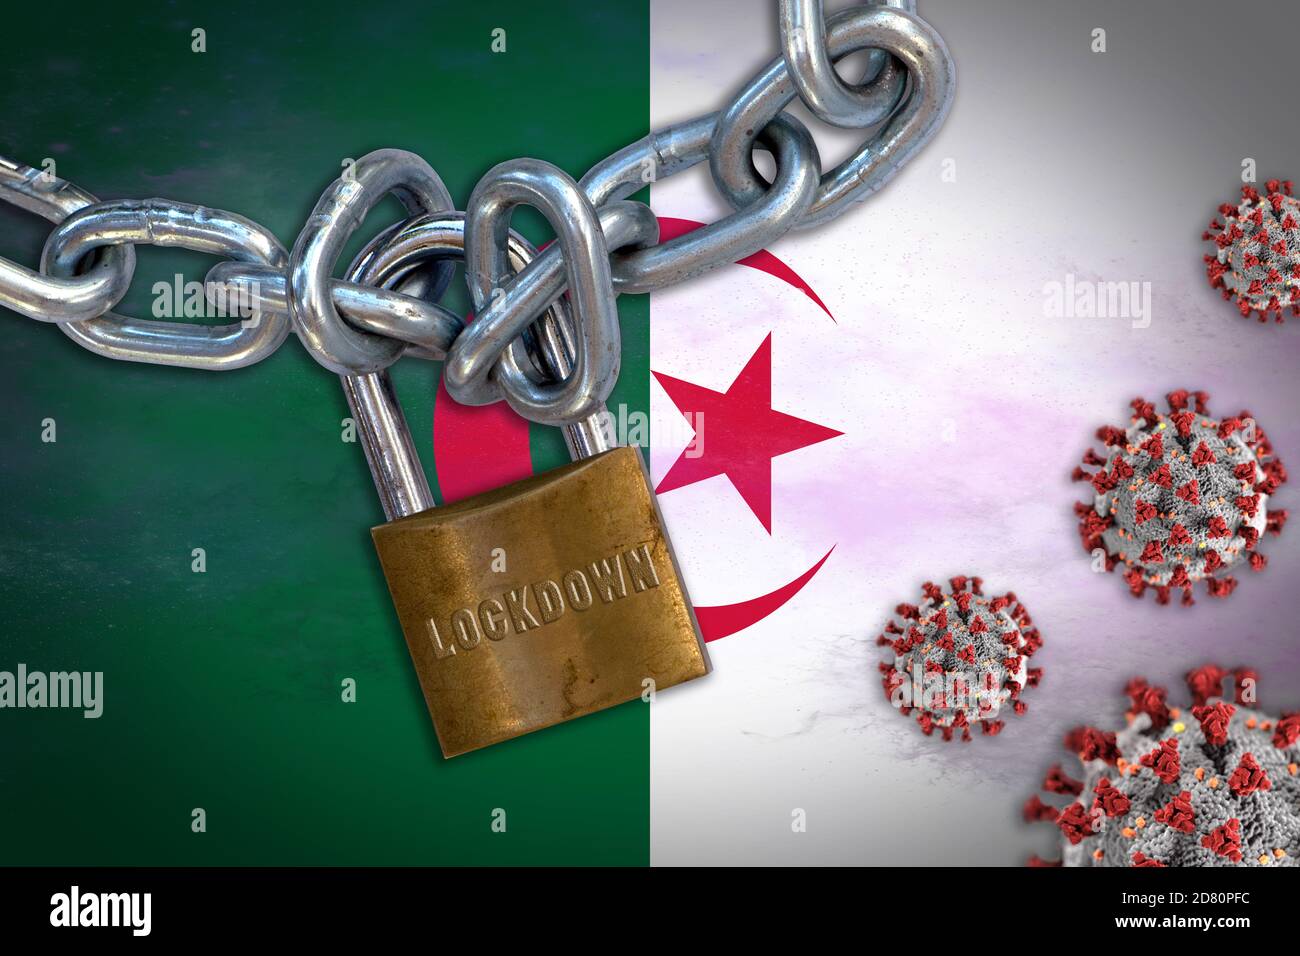 Concept of Coronavirus lockdown in Algeria, with Covid-19 particles overshadowing flag of Algeria. Stock Photo